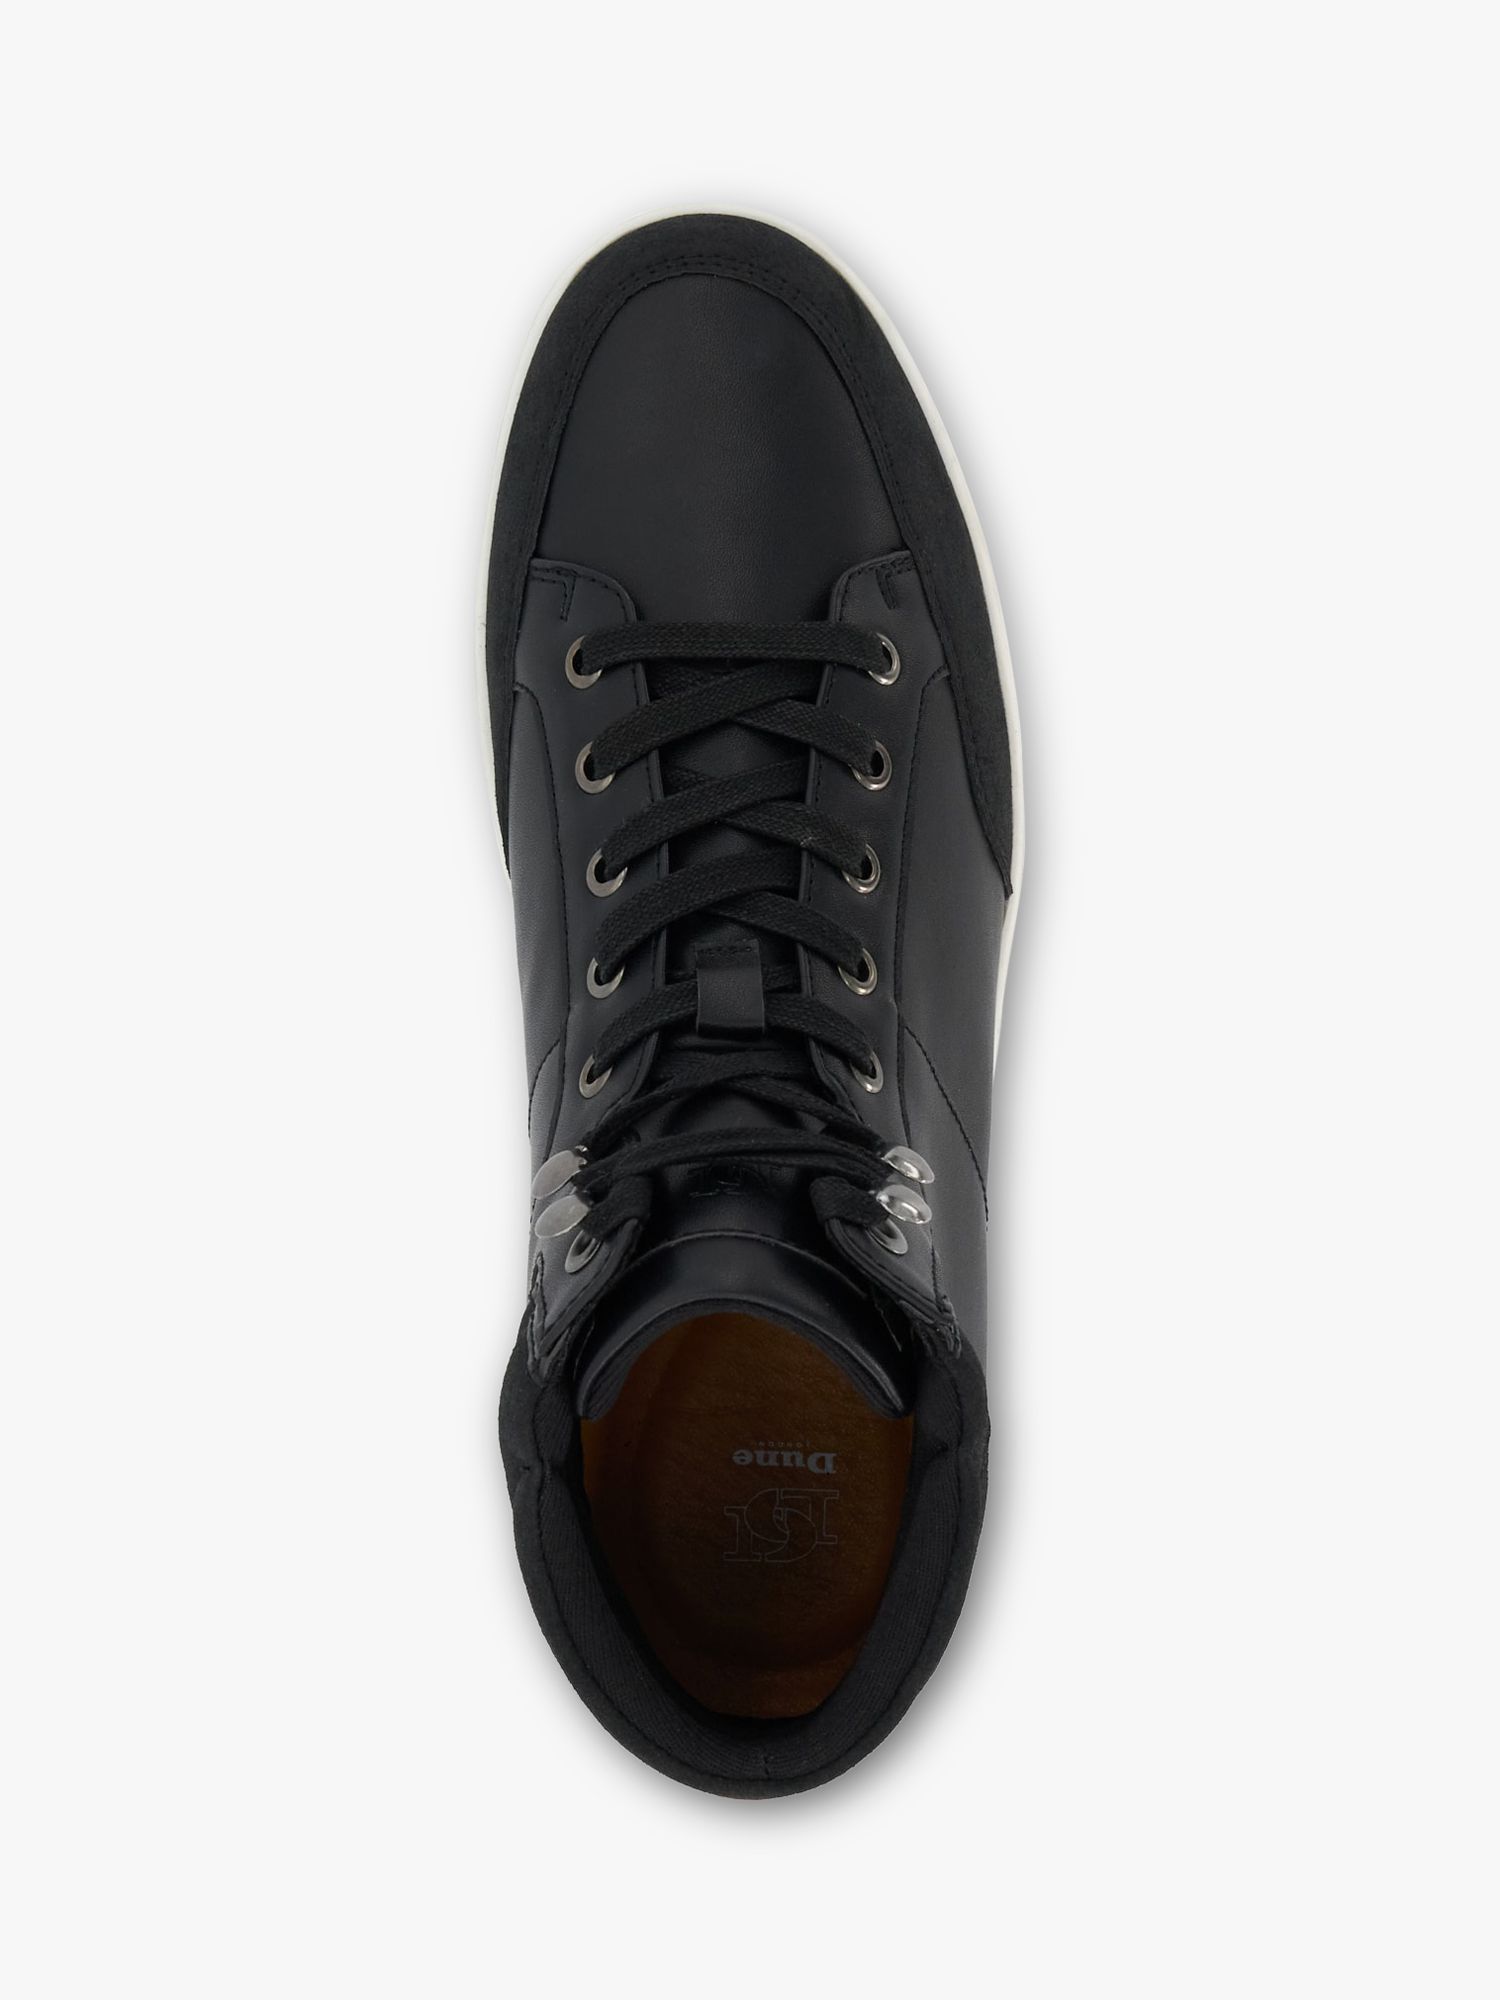 Dune Sutton Leather High-Top Trainers, Black, 6